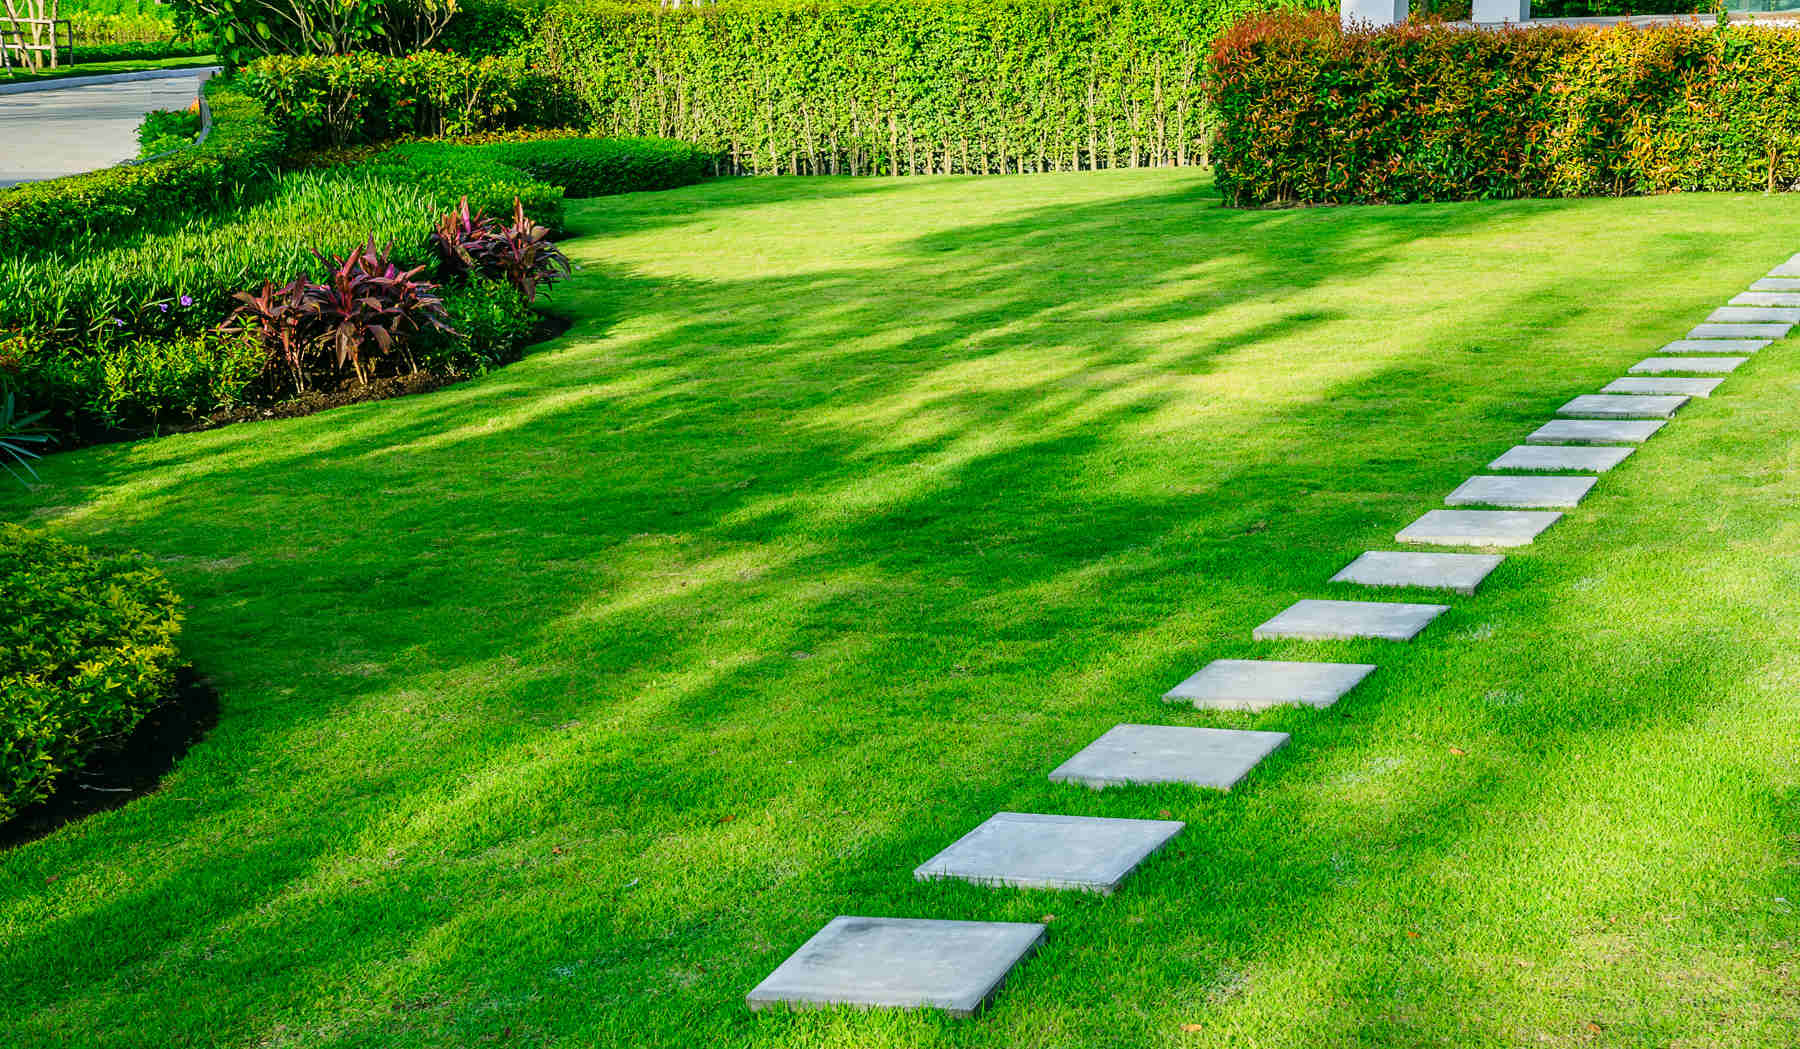 How To Lay Paving Stones On Grass